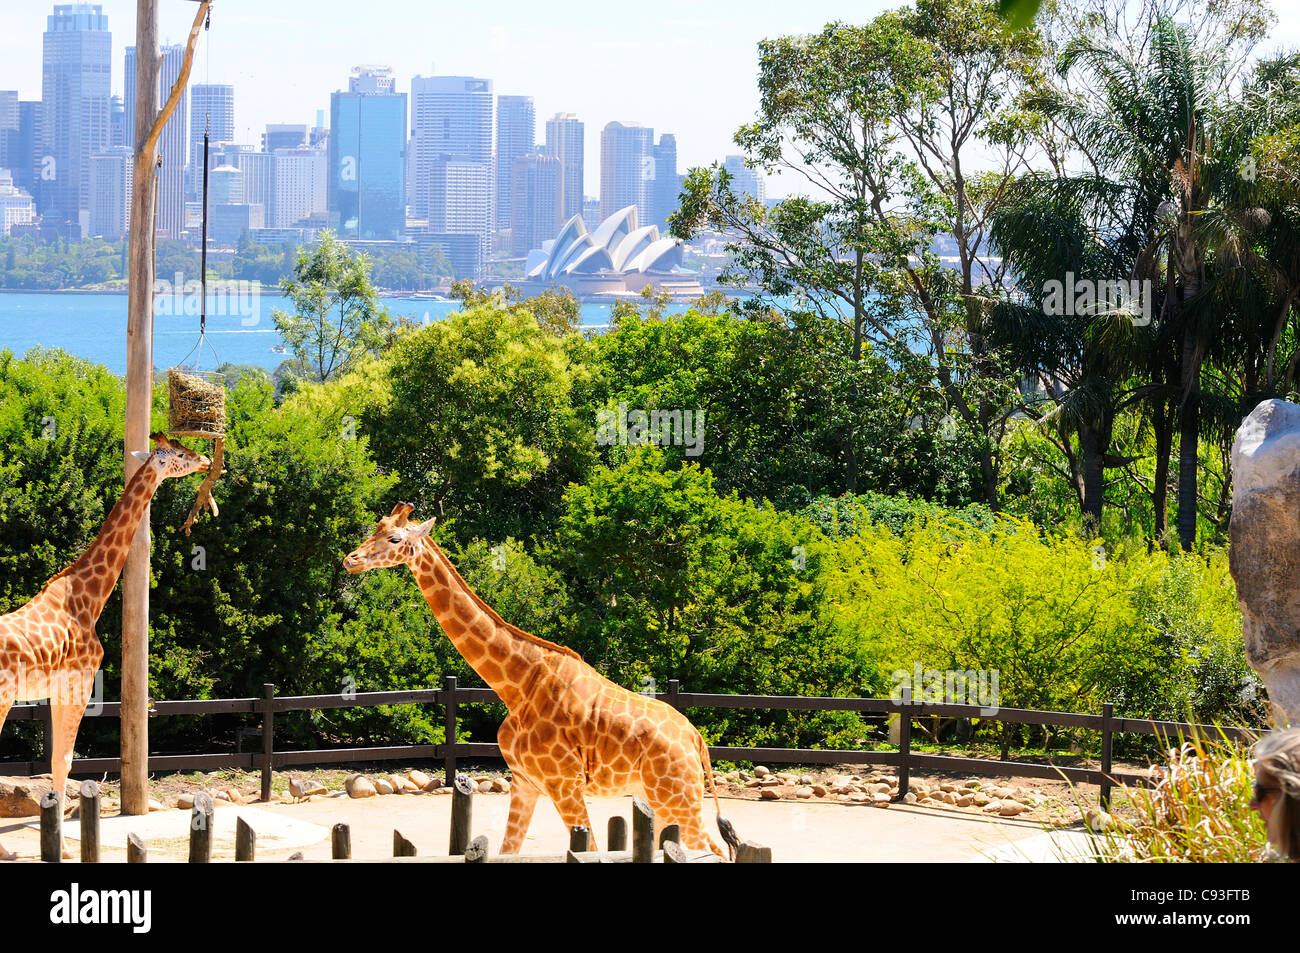 Giraffe's in their enclosure at Taronga Zoo on the shores of Sydney Harbour in the suburb of Mosman with the Sydney CBD behind. Stock Photo